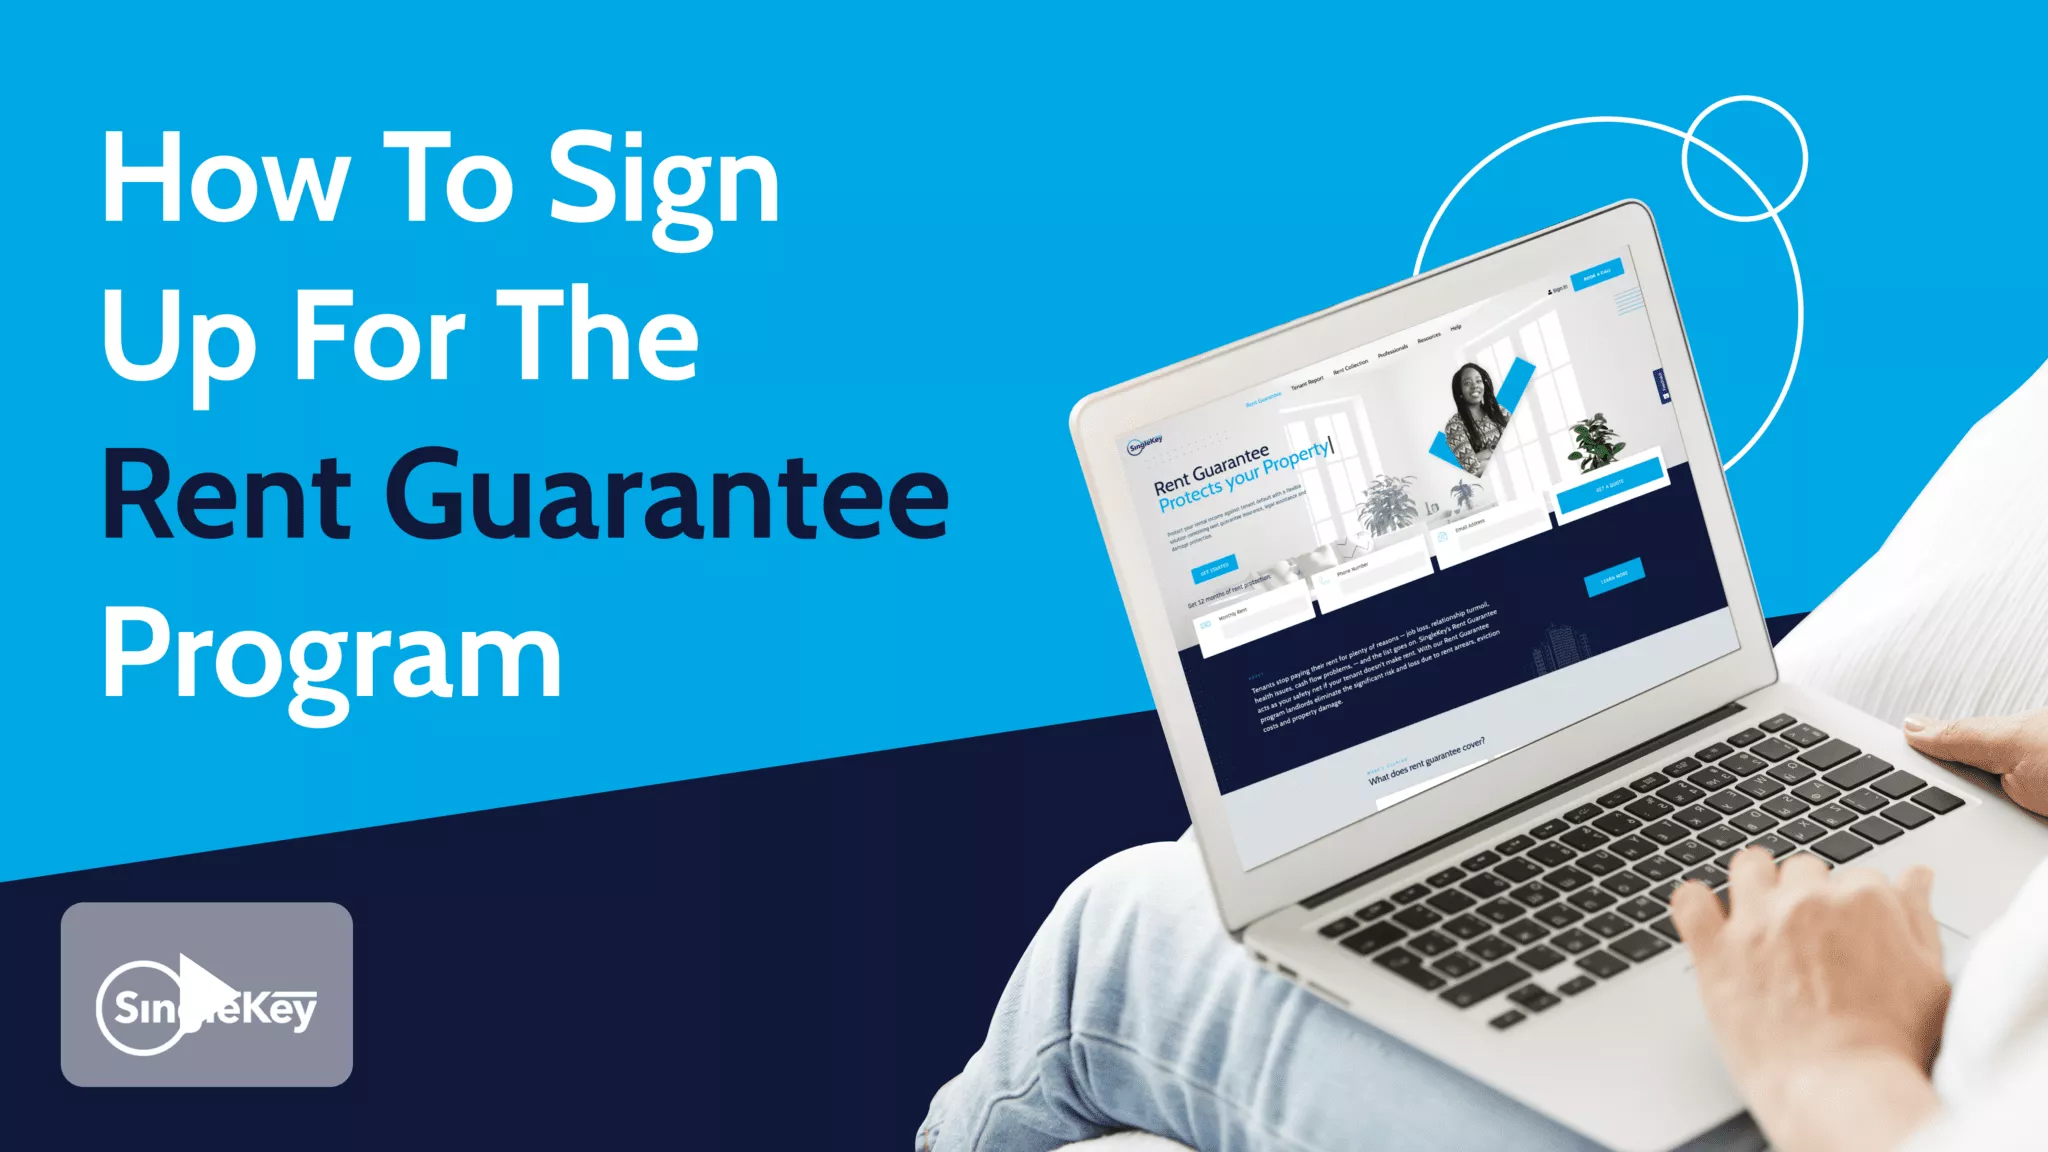 How to: Sign Up for the Rent Guarantee